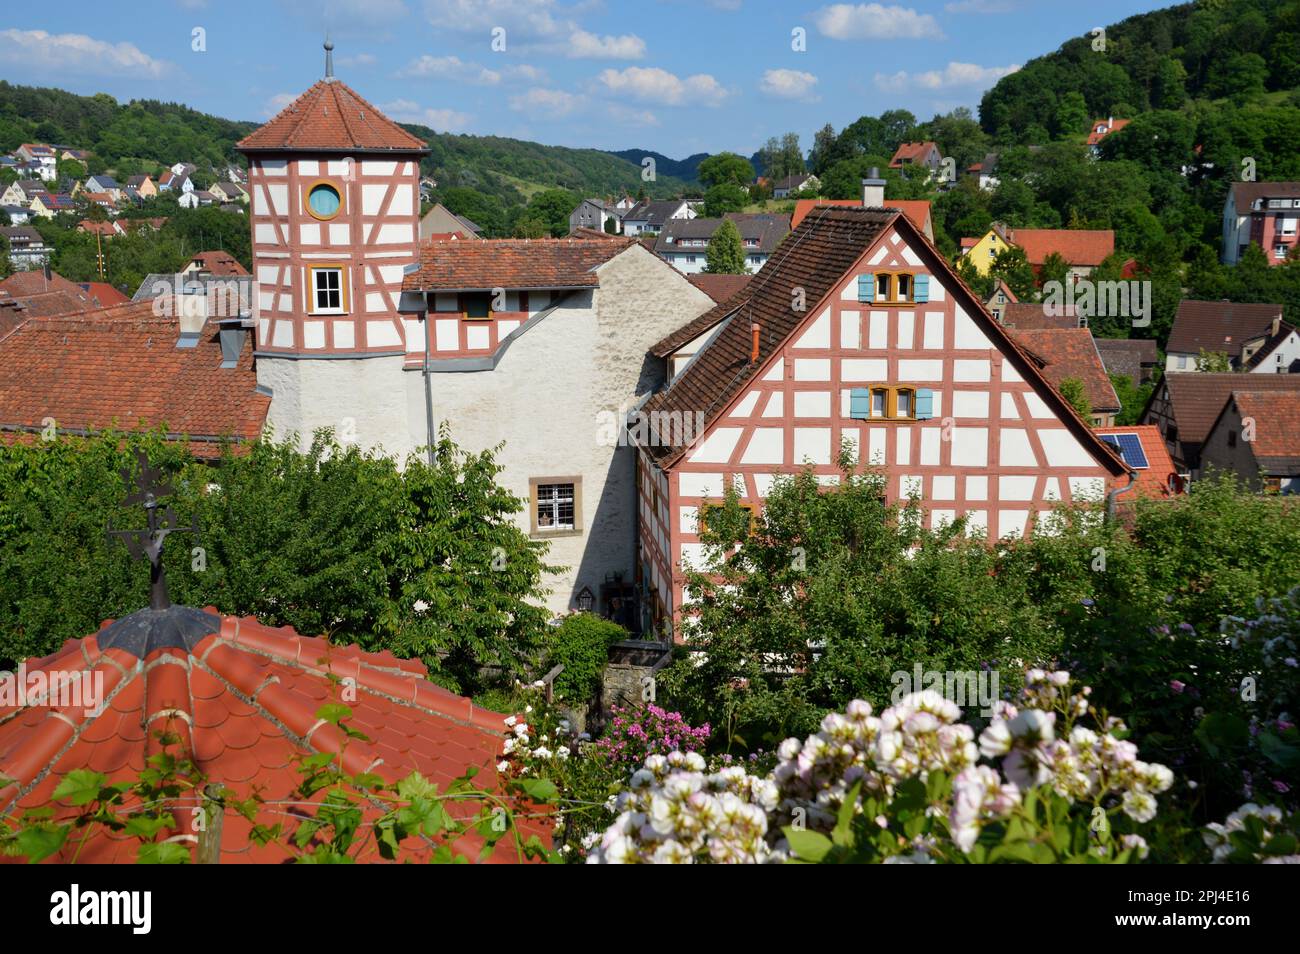 Germany, Baden-Württemberg, Creglingen:  'Romschlössle', a three-storey timber-frame mansion dating from 1593, formerly 'Haus Weinsberg' now houses th Stock Photo